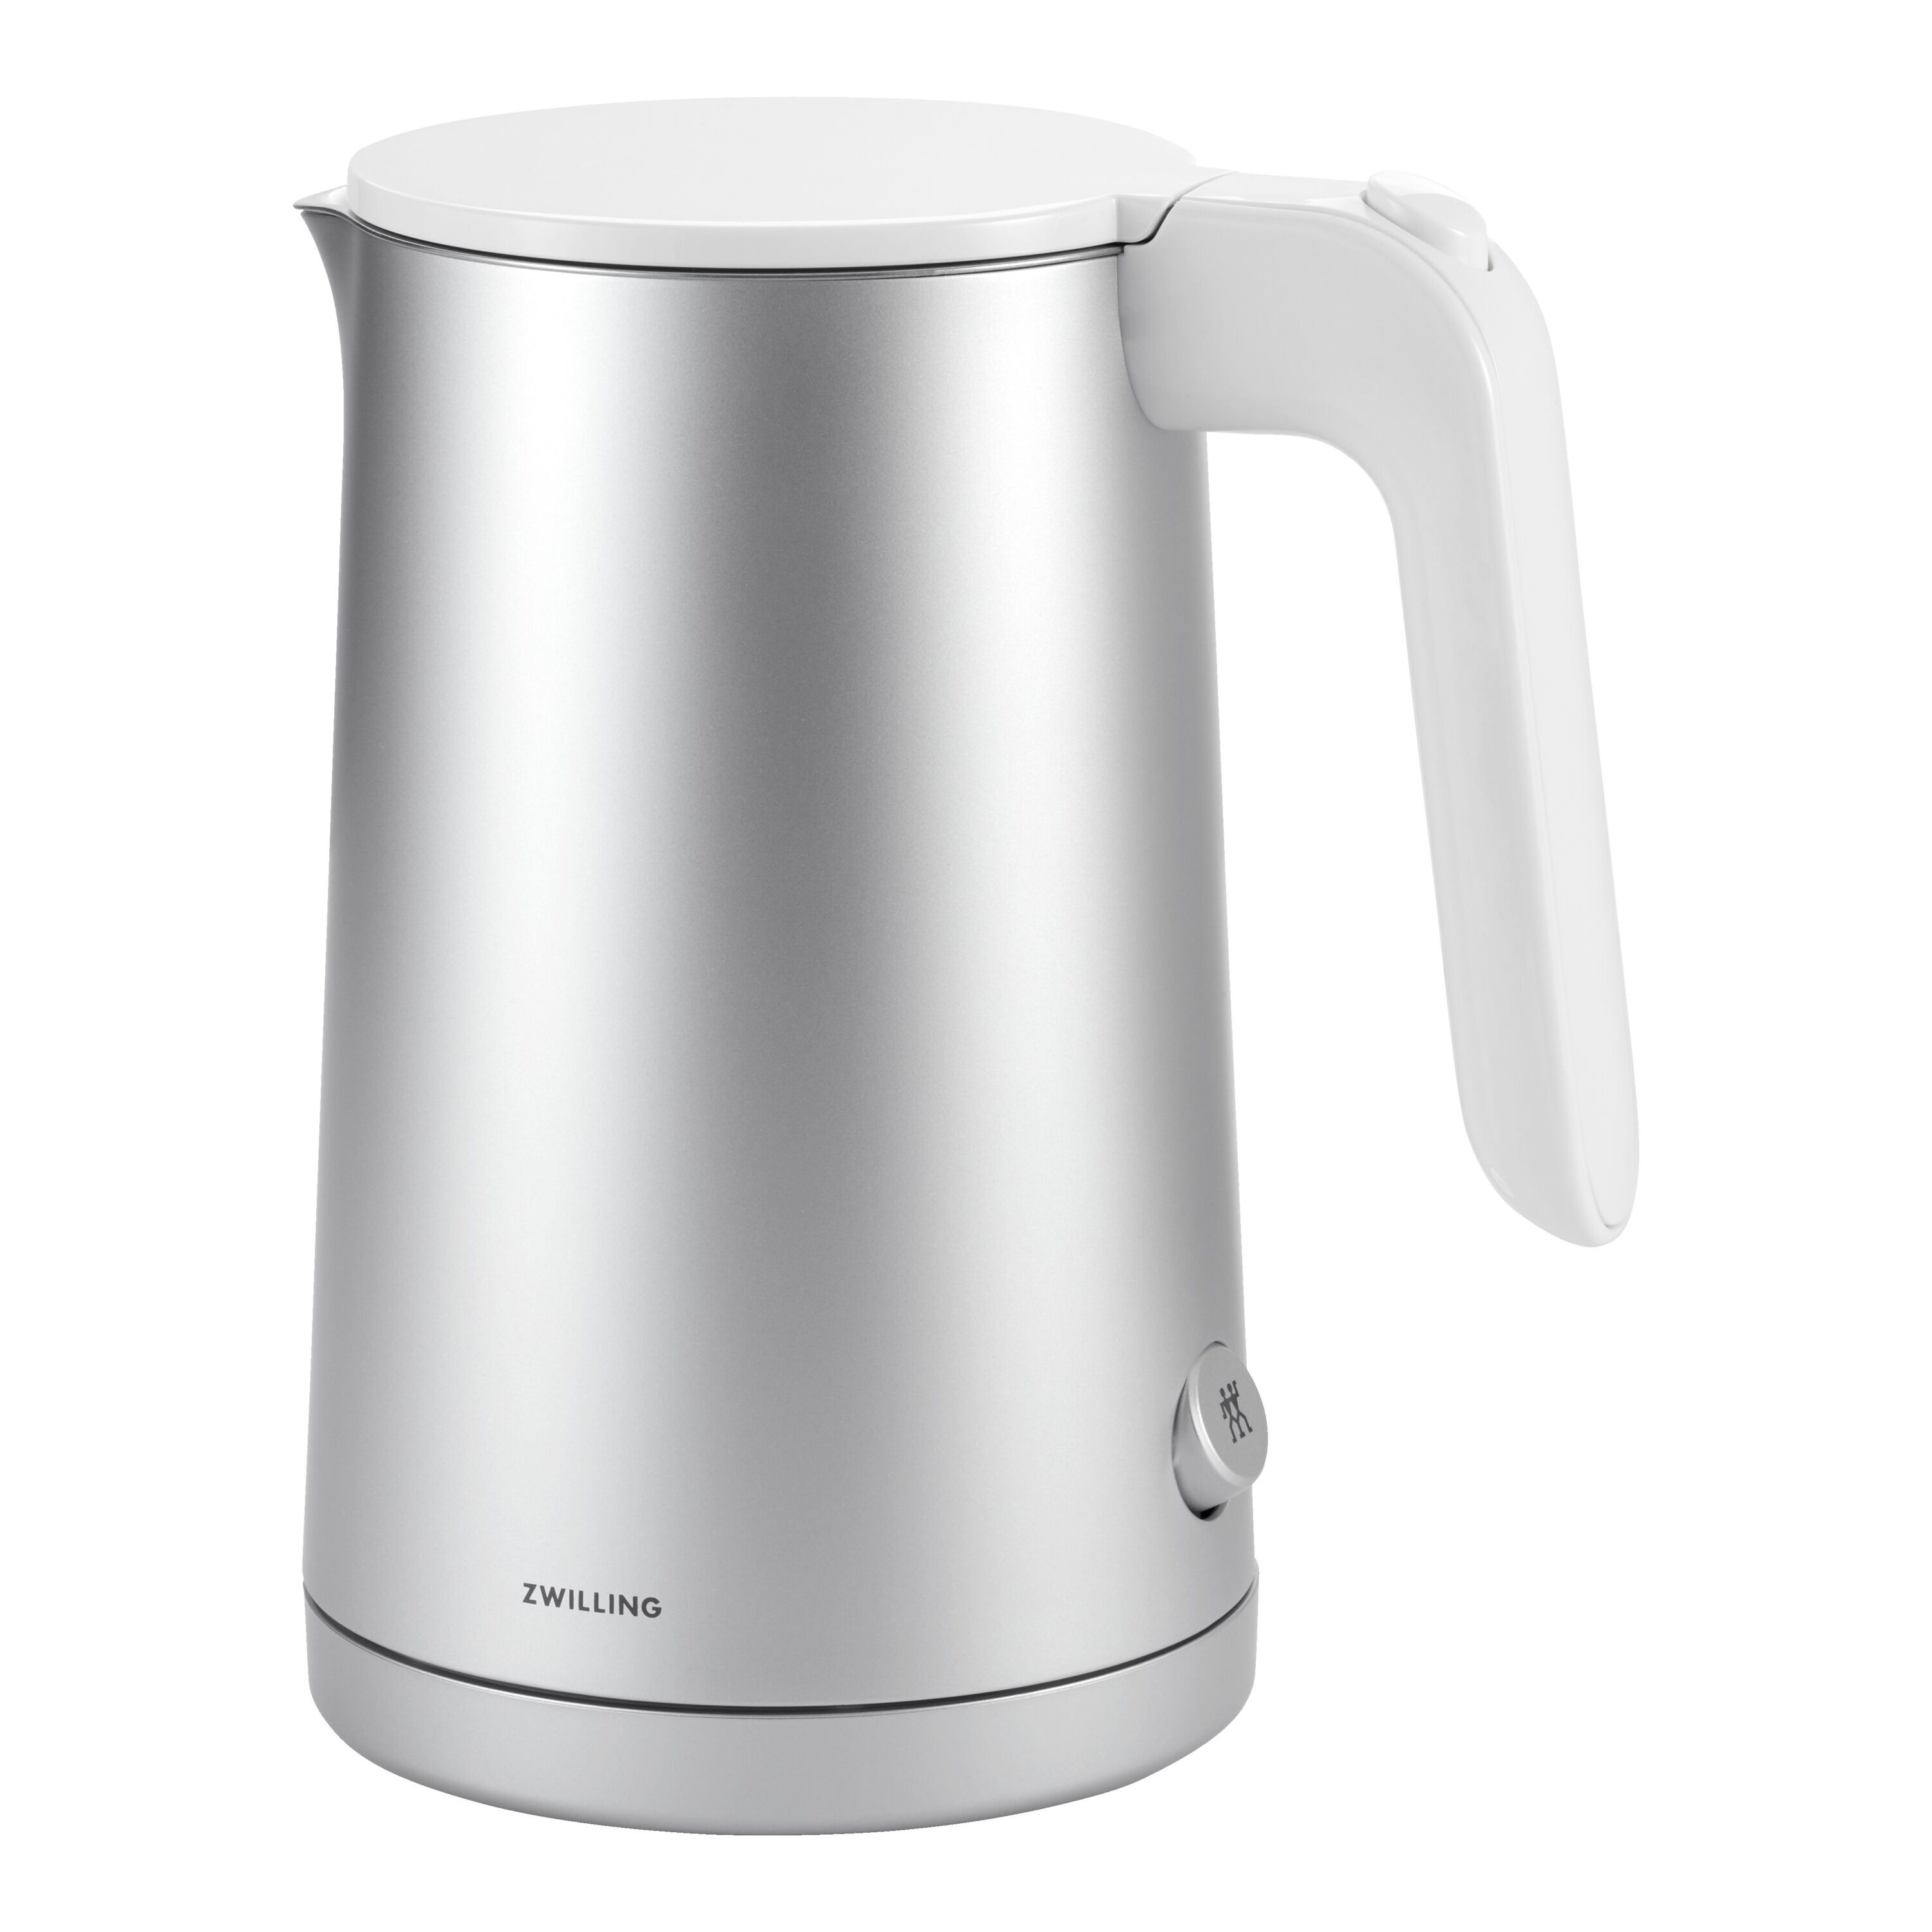 Electric Kettle(1.0L), 100% Stainless Steel BPA Free Classic Pour